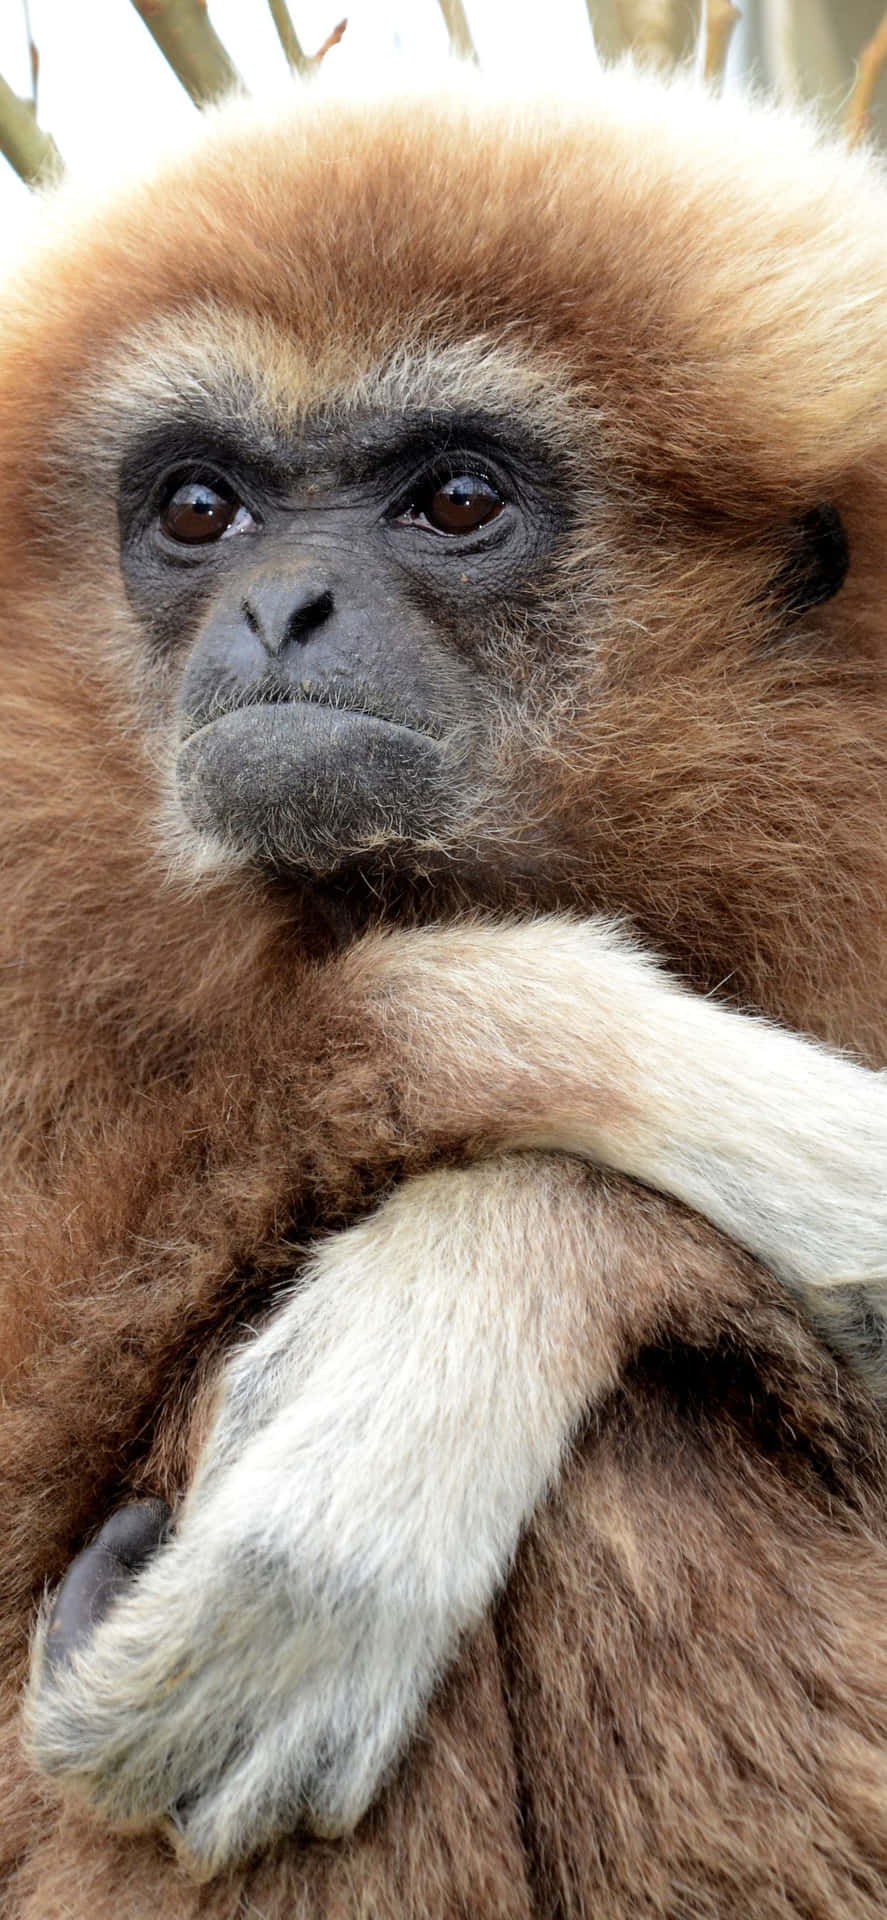 A close-up view of the stunning iPhone XS Max Gibbon